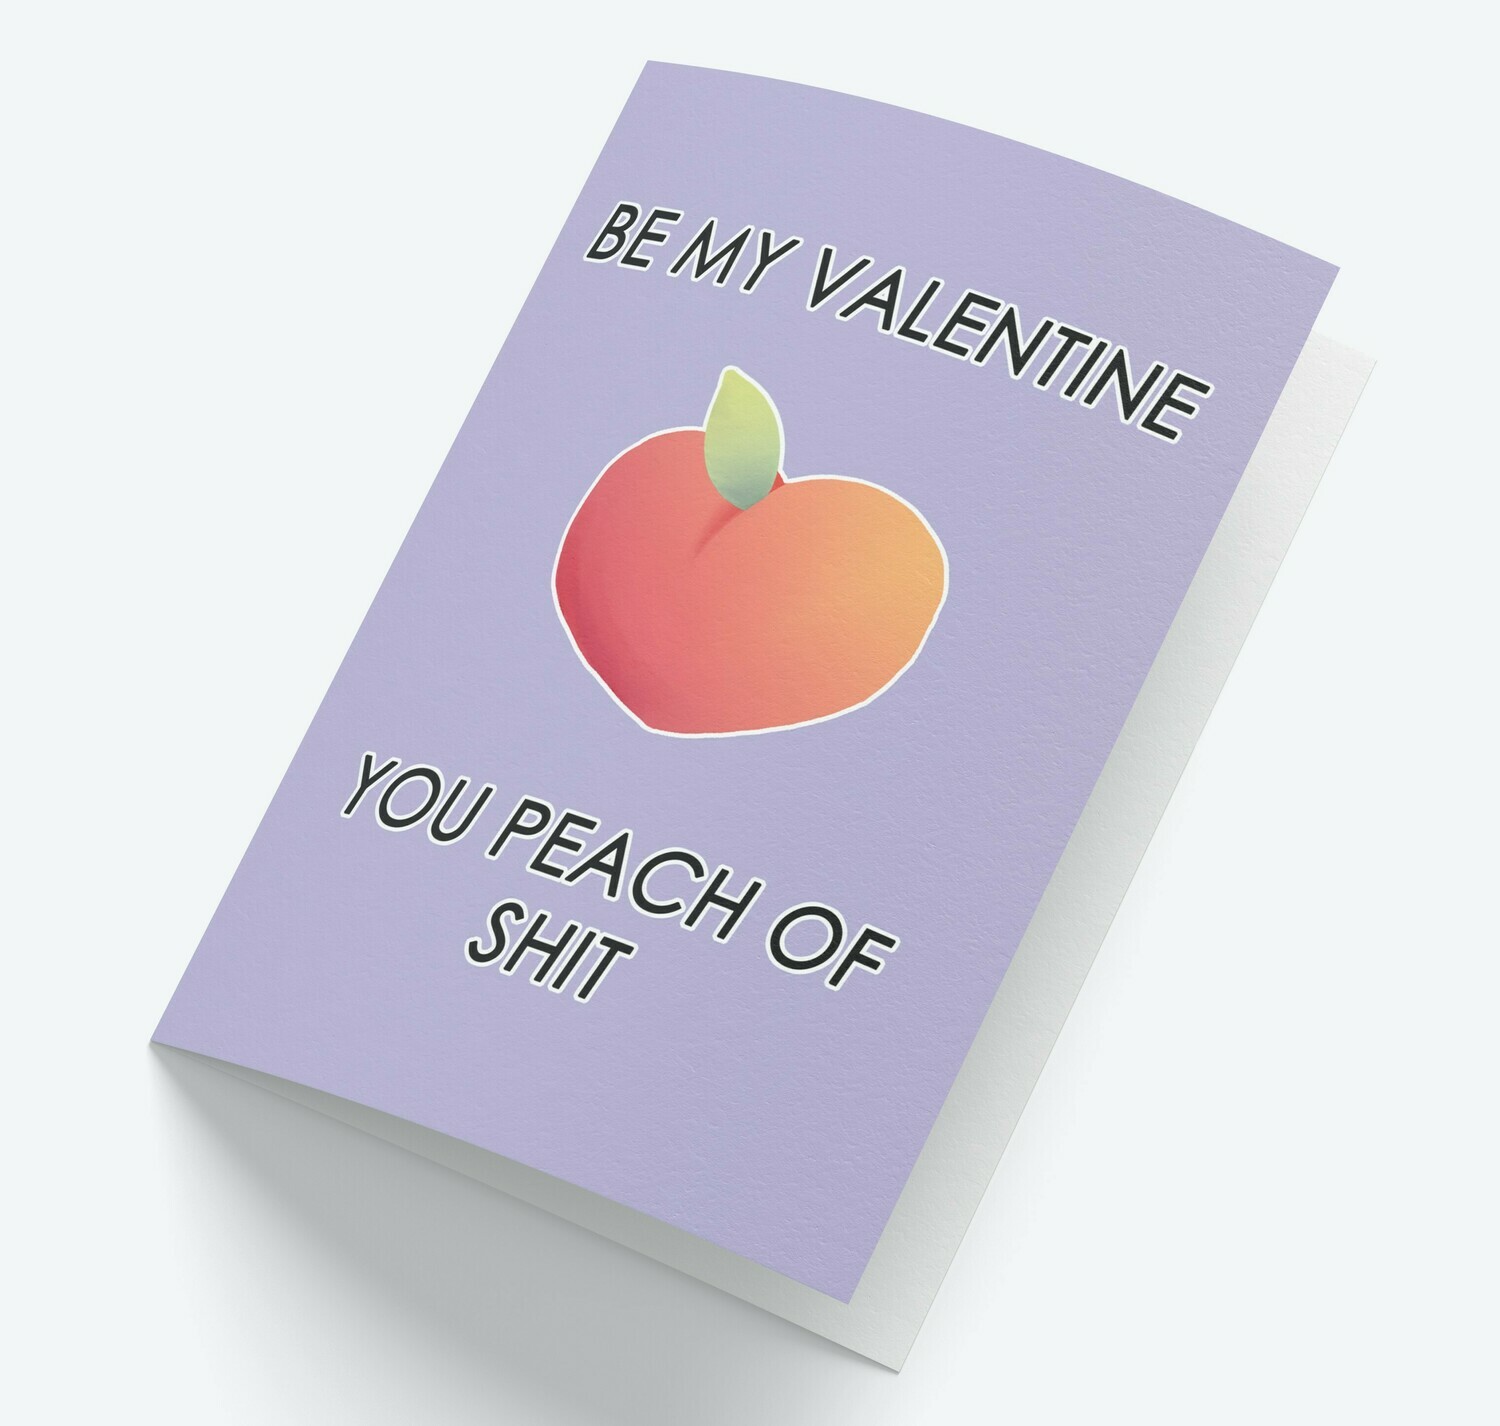 Peach of Shit Valentines Day Card